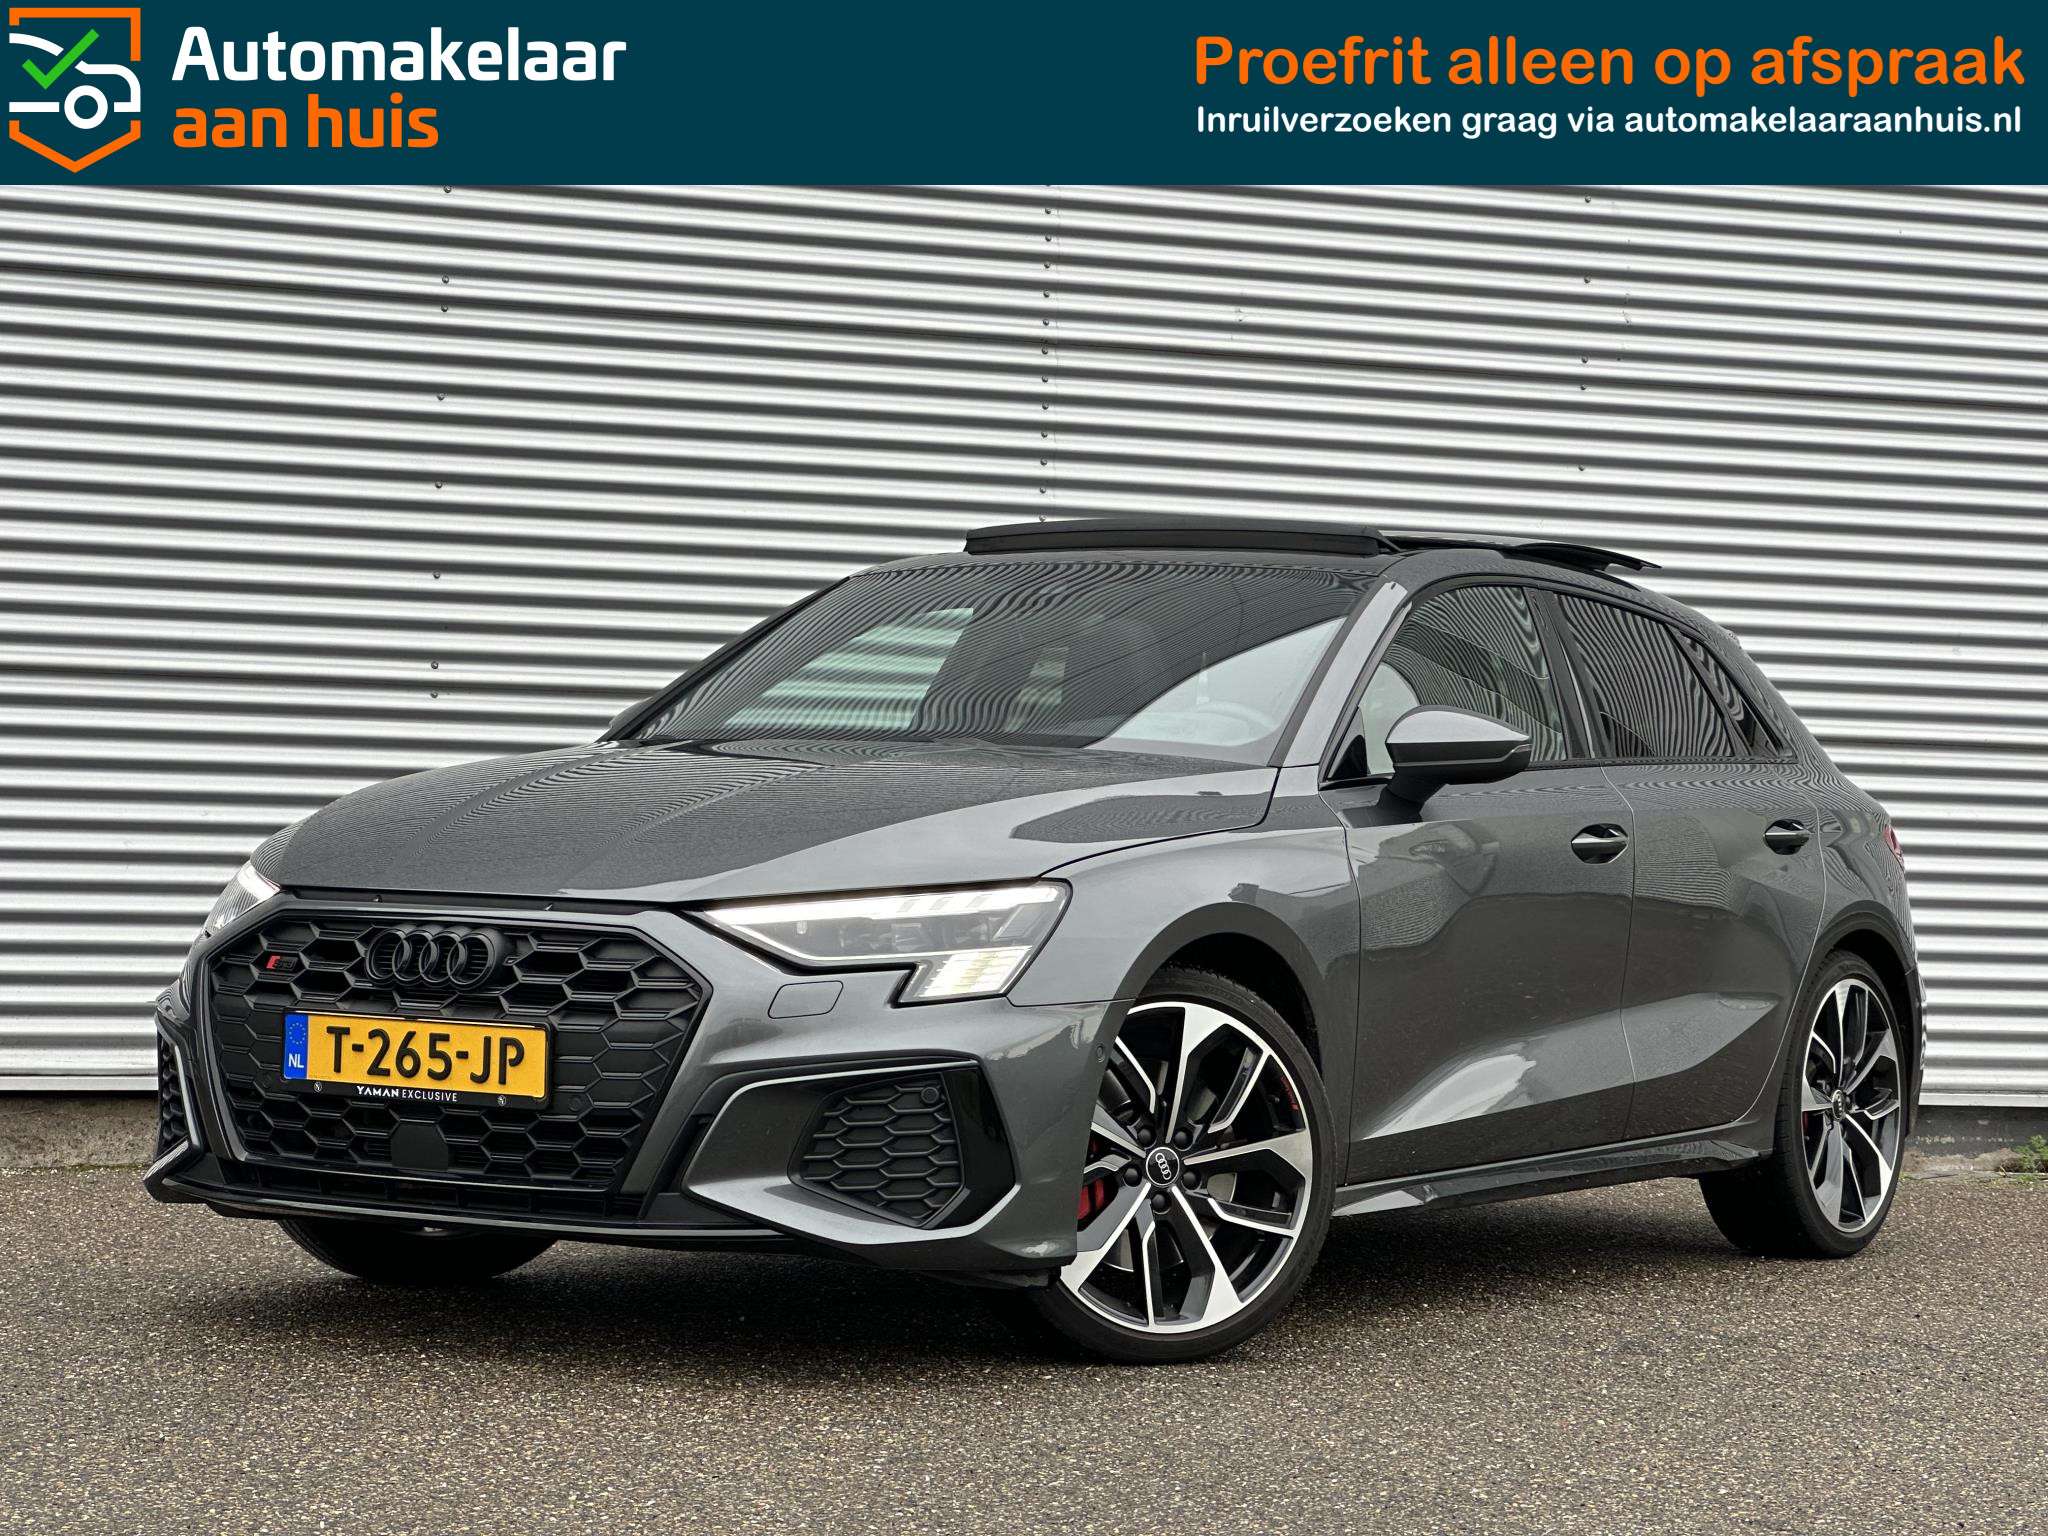 Audi S3 Compact in Grey used in MIJDRECHT for € 64,995.-